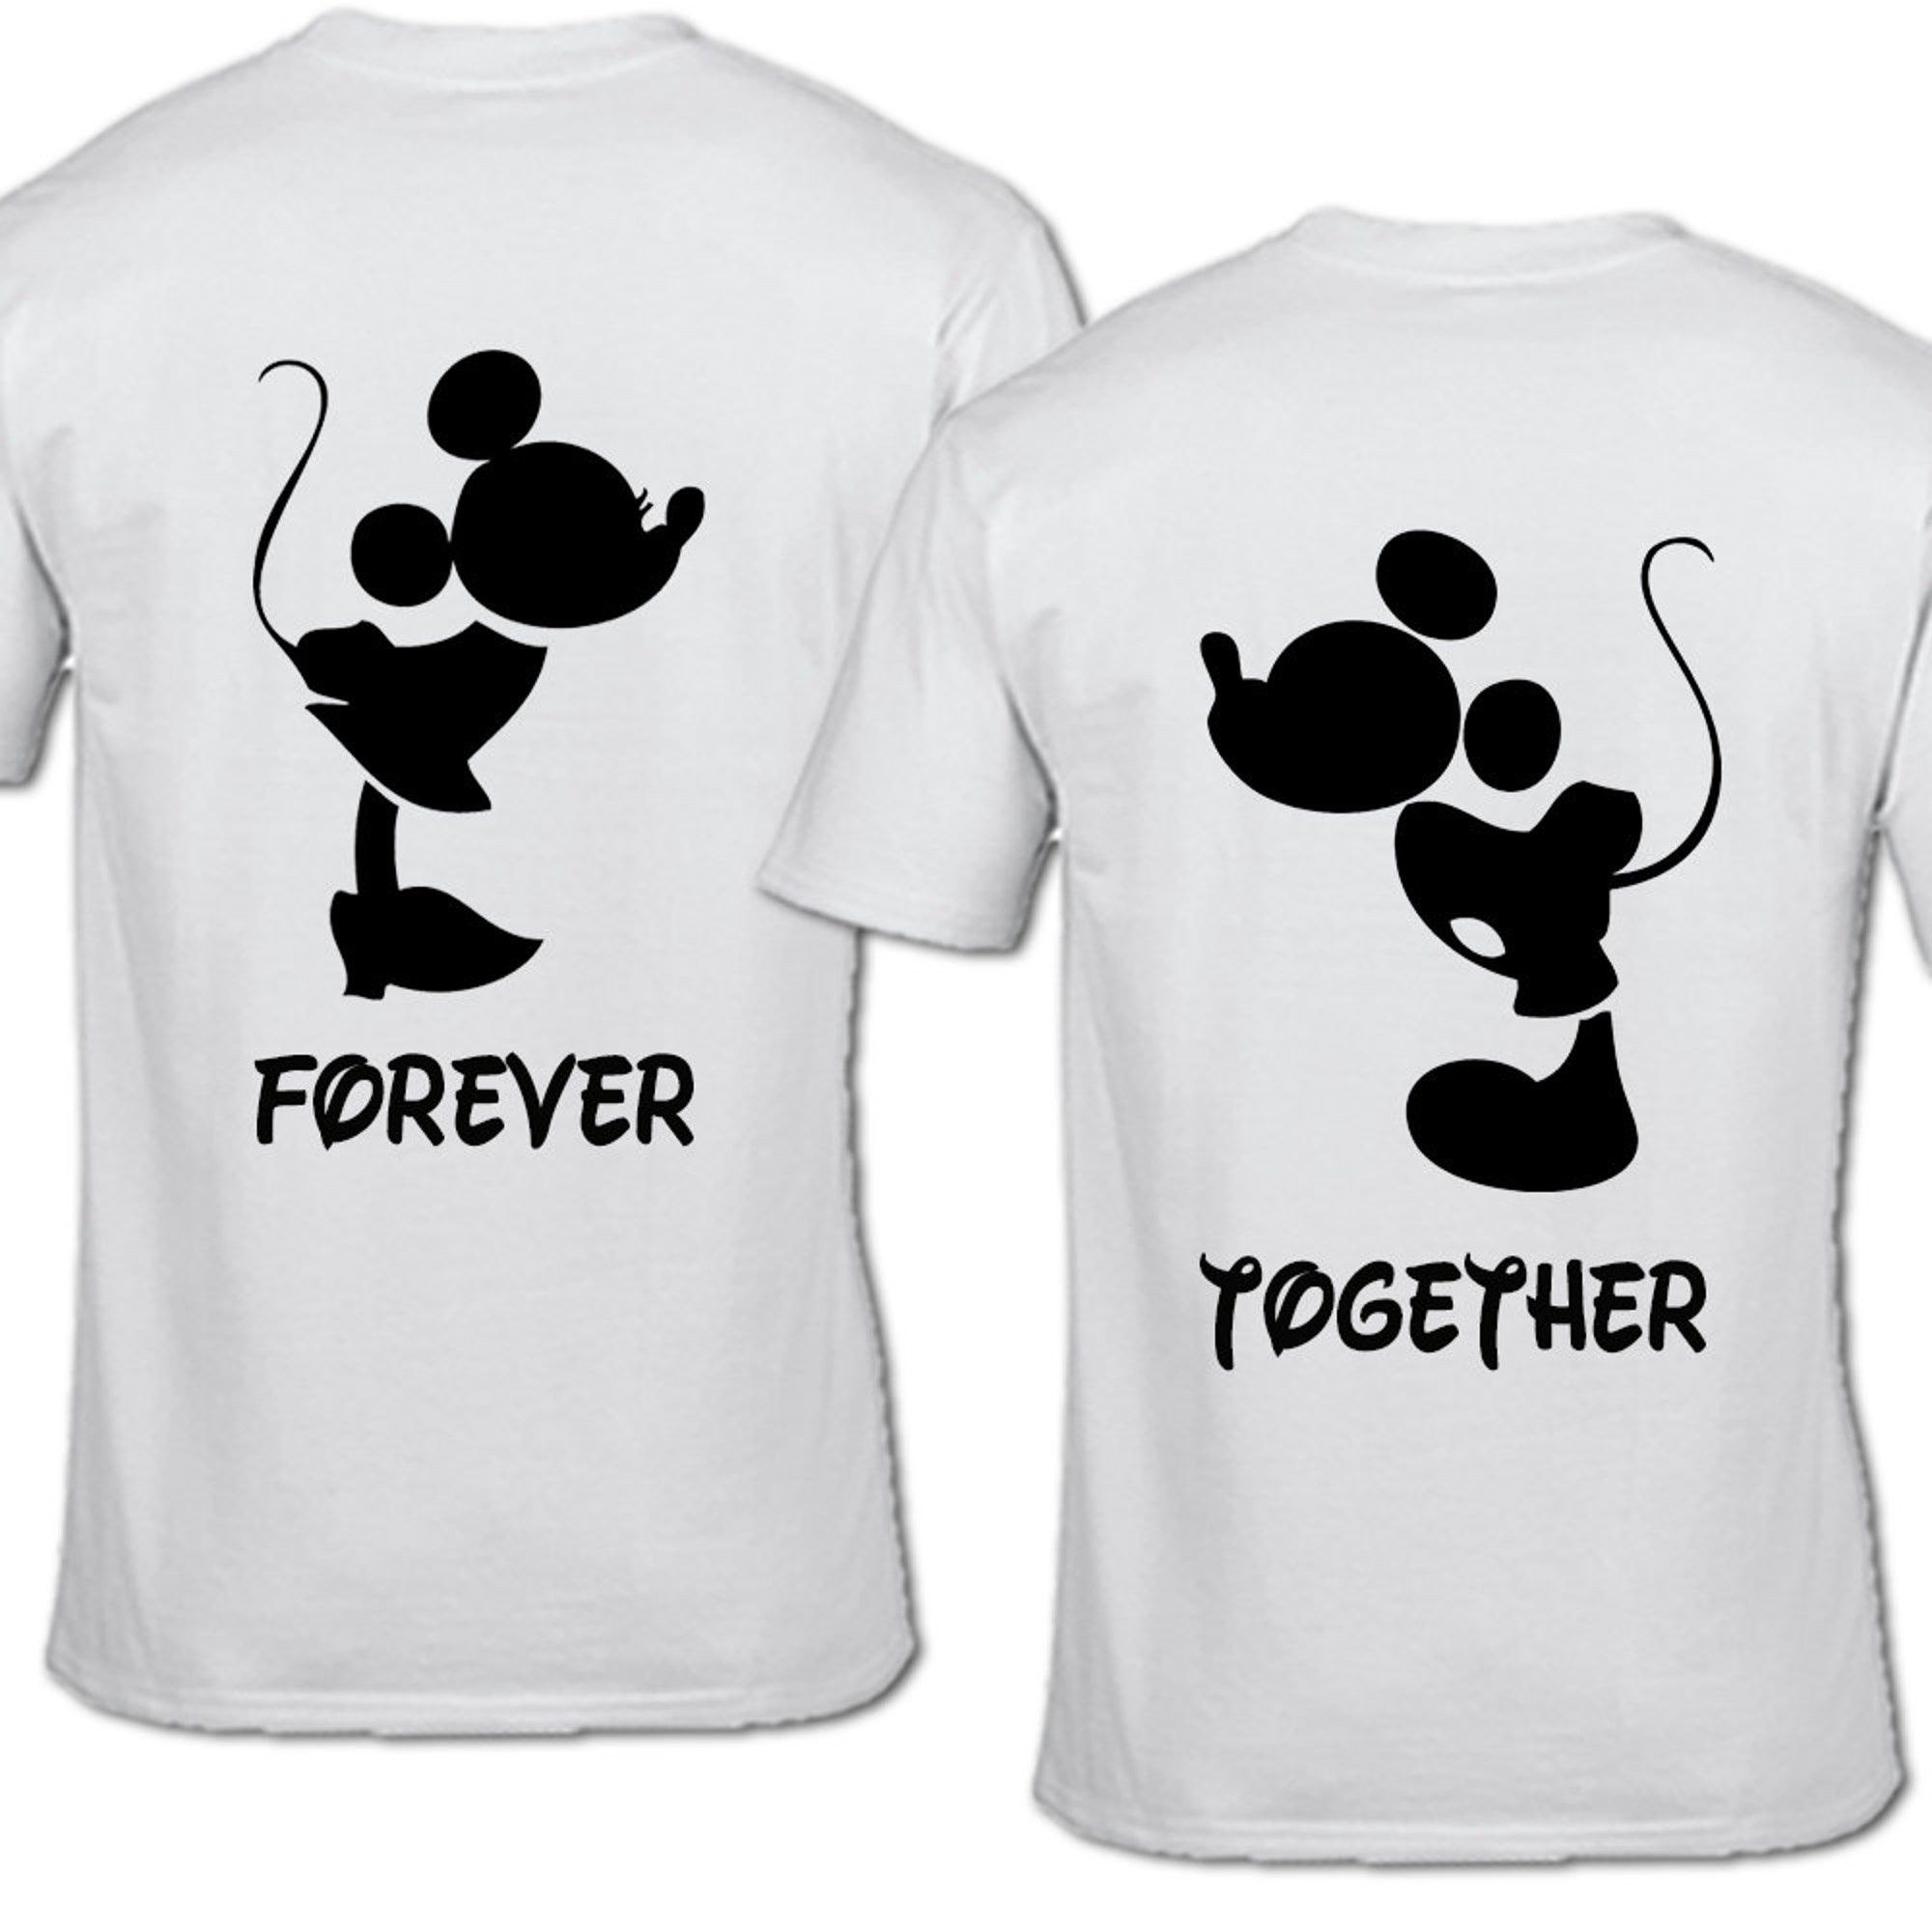 Discover FOREVER TOGETHER t-shirts